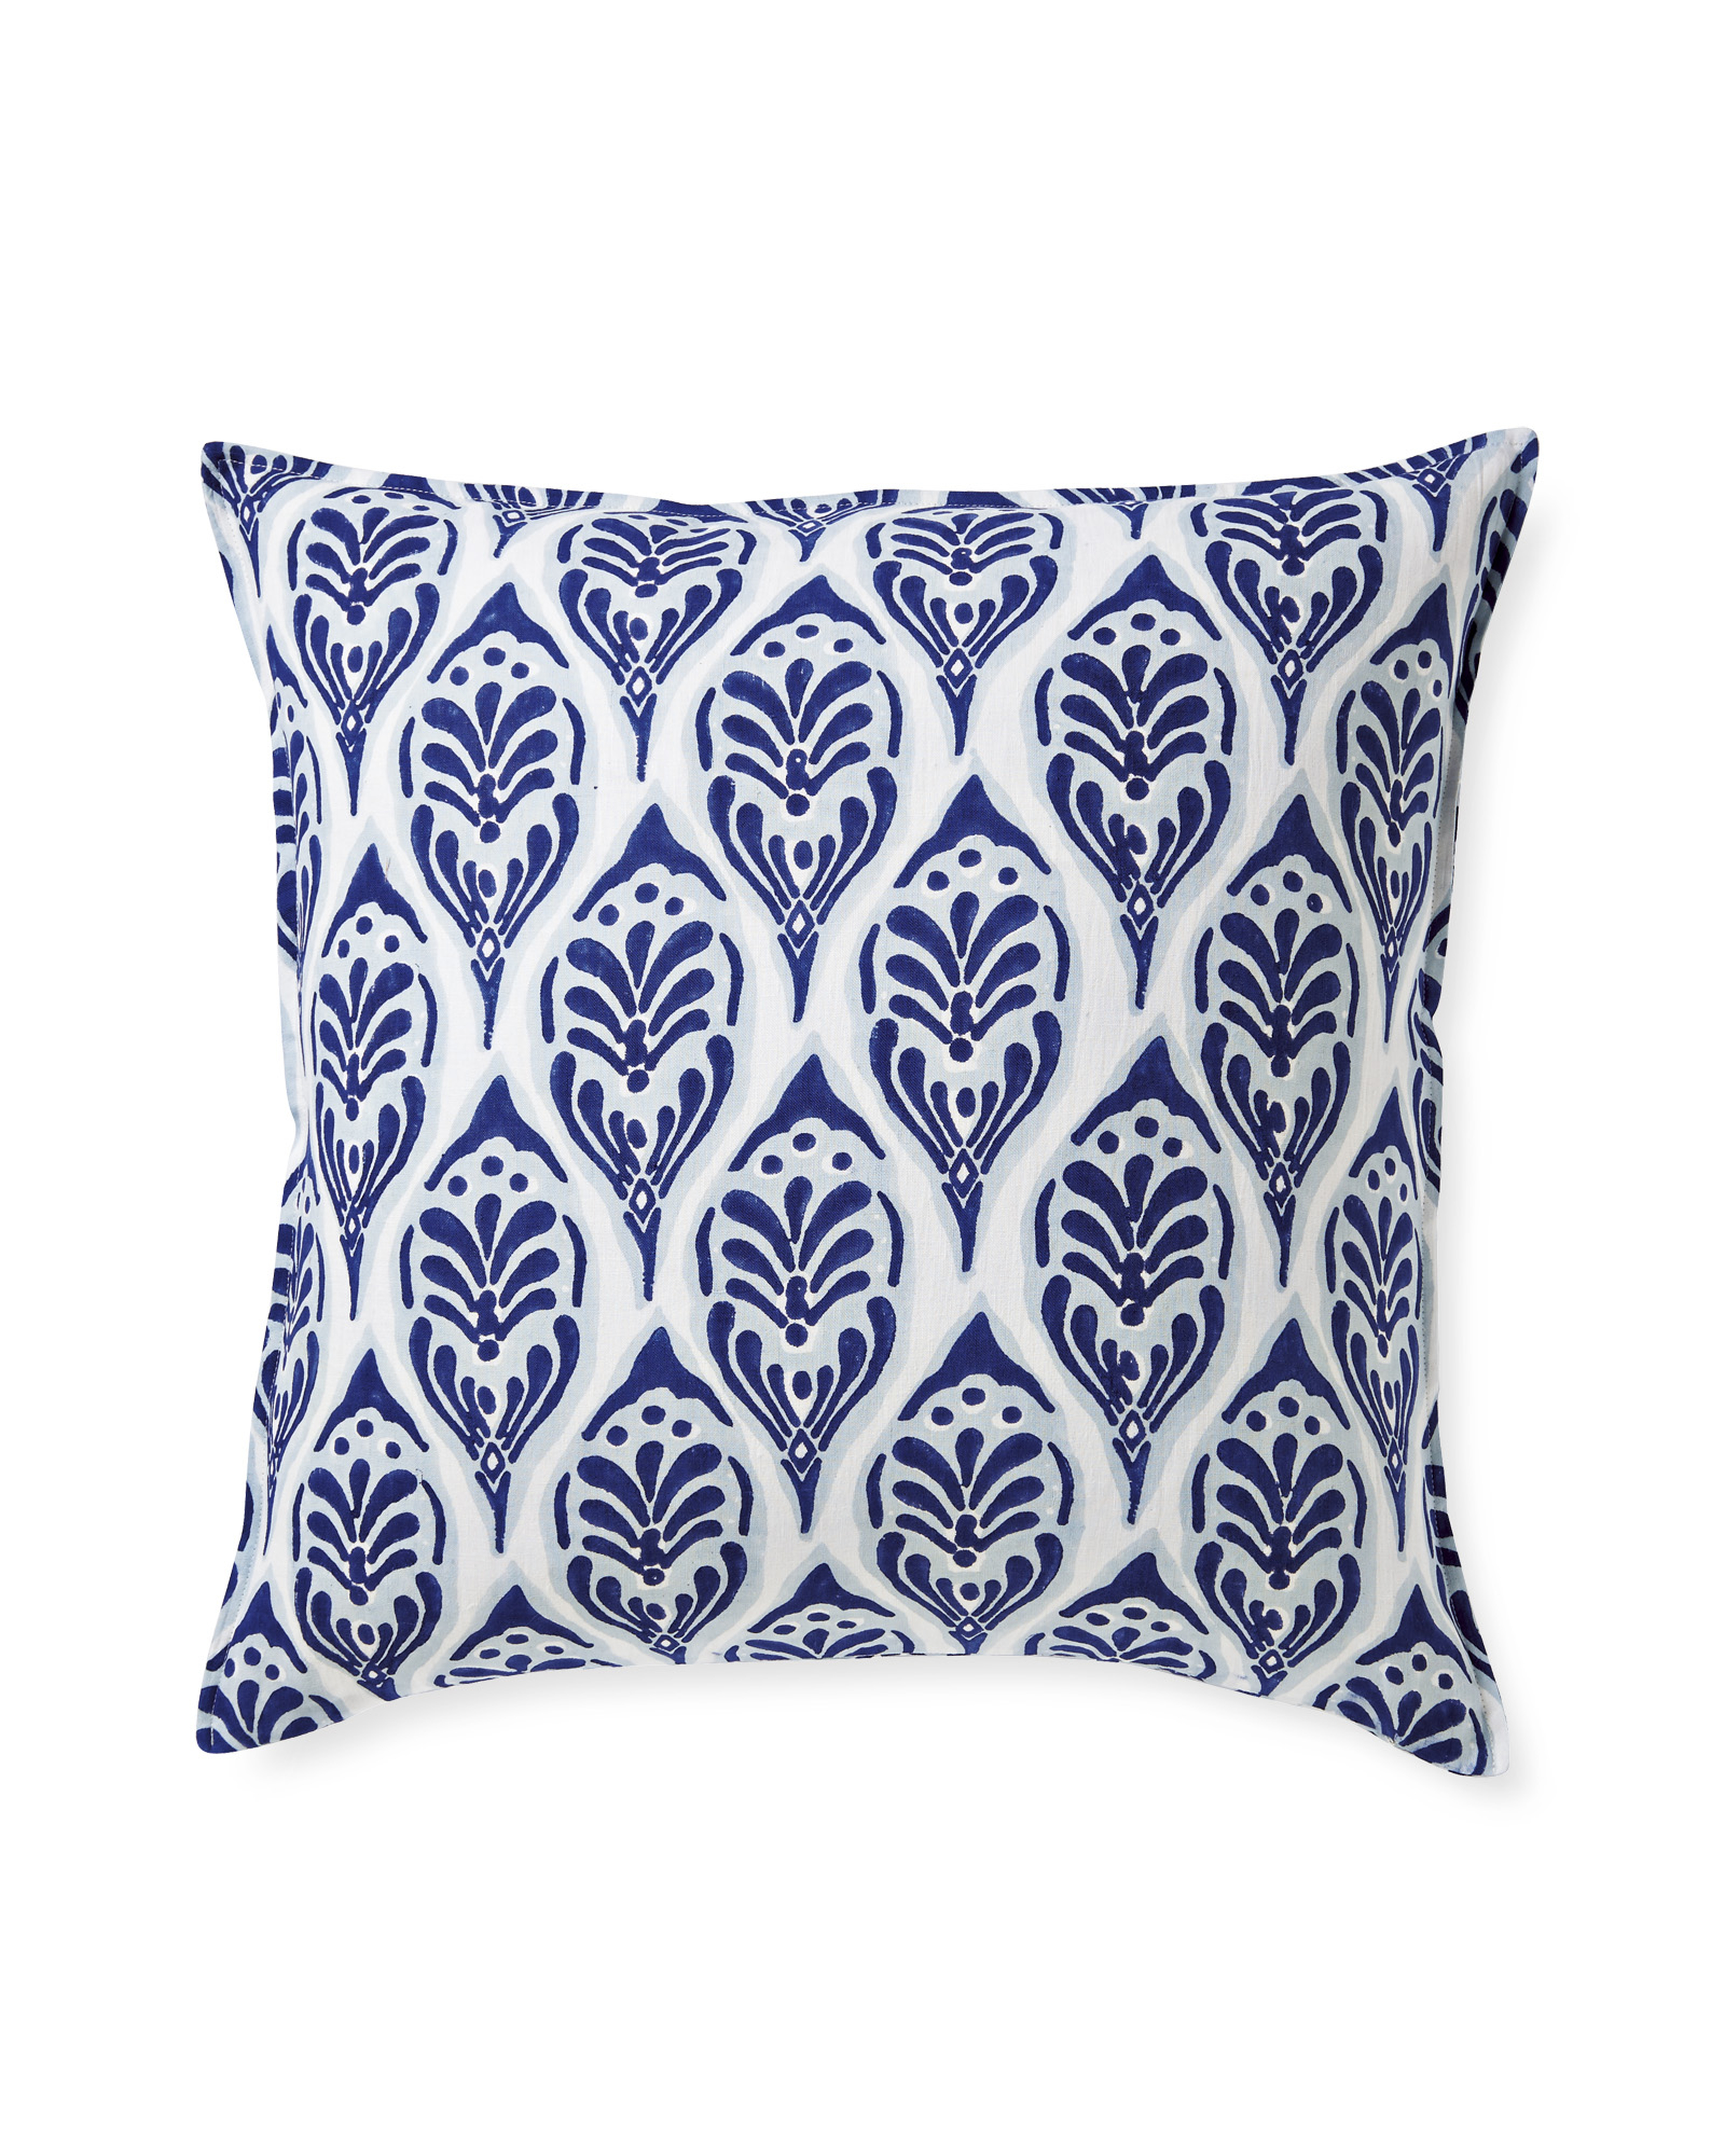 Magnolia Pillow Cover - Serena and Lily